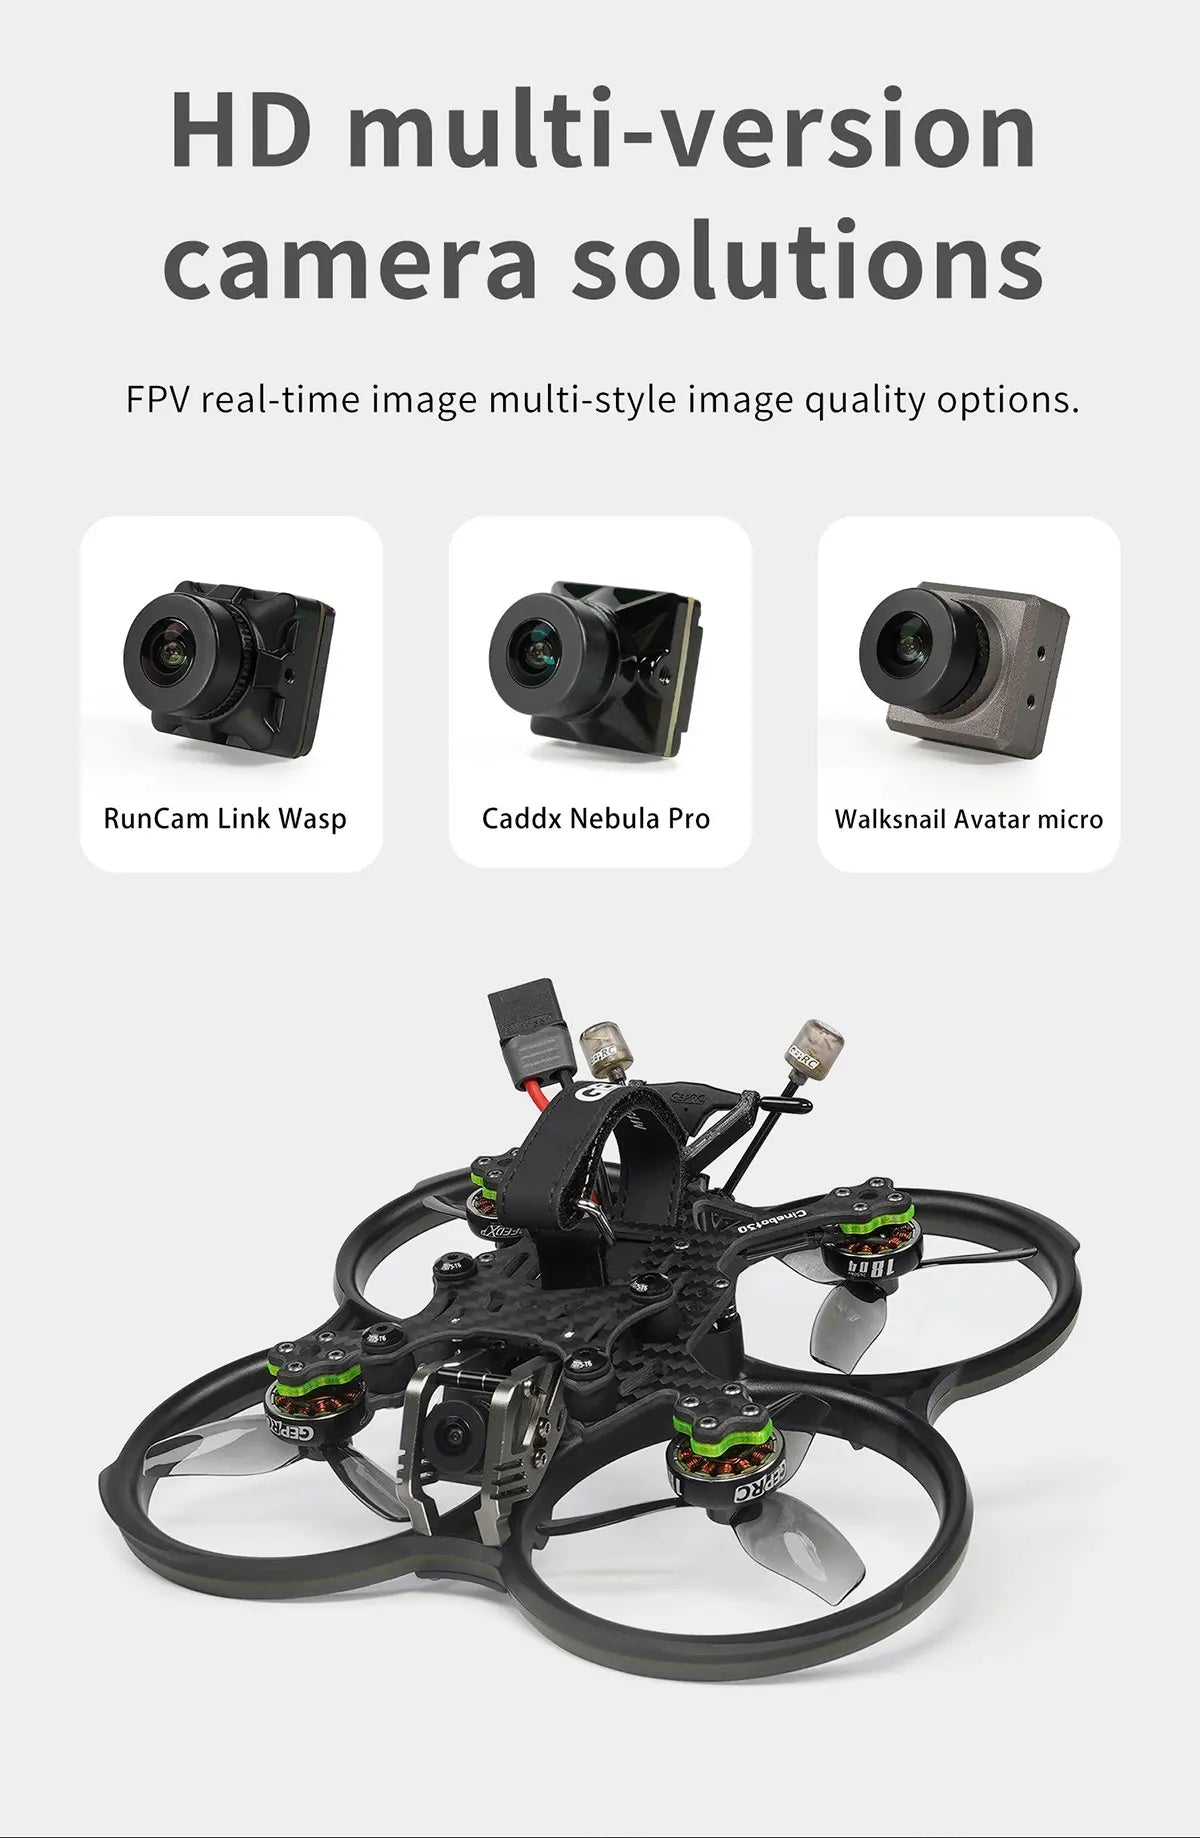 GEPRC Cinebot30 FPV Drone, HD multi-version camera solutions FPV real-time image quality options . RunC